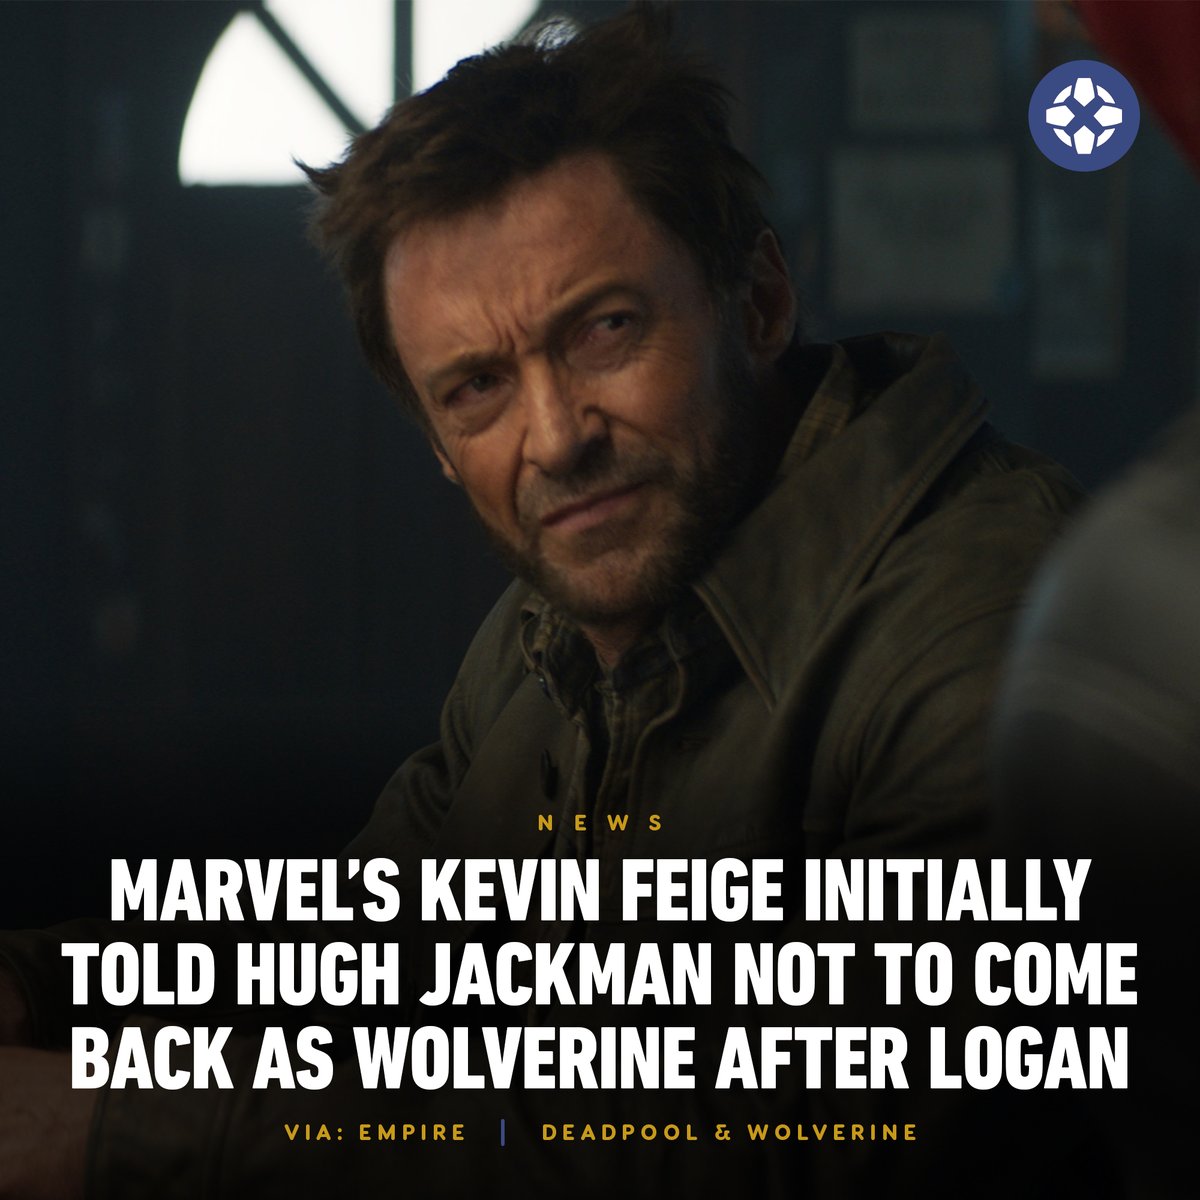 Kevin Feige told Hugh Jackman: “Let me give you a piece of advice, Hugh. Don’t come back. You had the greatest ending in history with Logan. That’s not something we should undo.' For more from the Deadpool & Wolverine interview: bit.ly/3UIDbDH